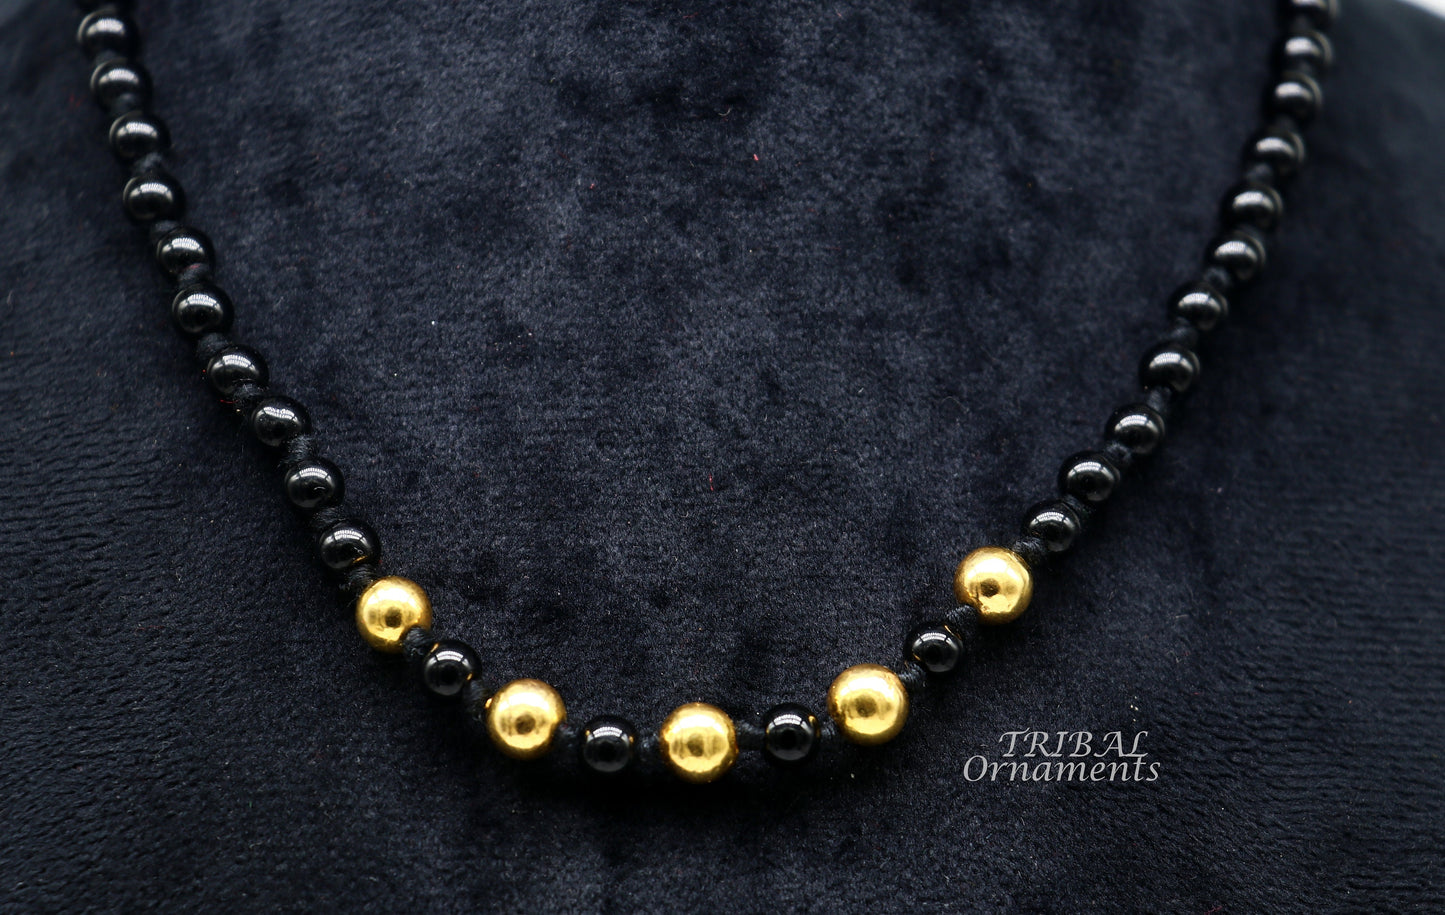 22kt yellow gold handmade wax beads and black beaded adjustable necklace, amazing single line choker for brides or girl's  set91 - TRIBAL ORNAMENTS